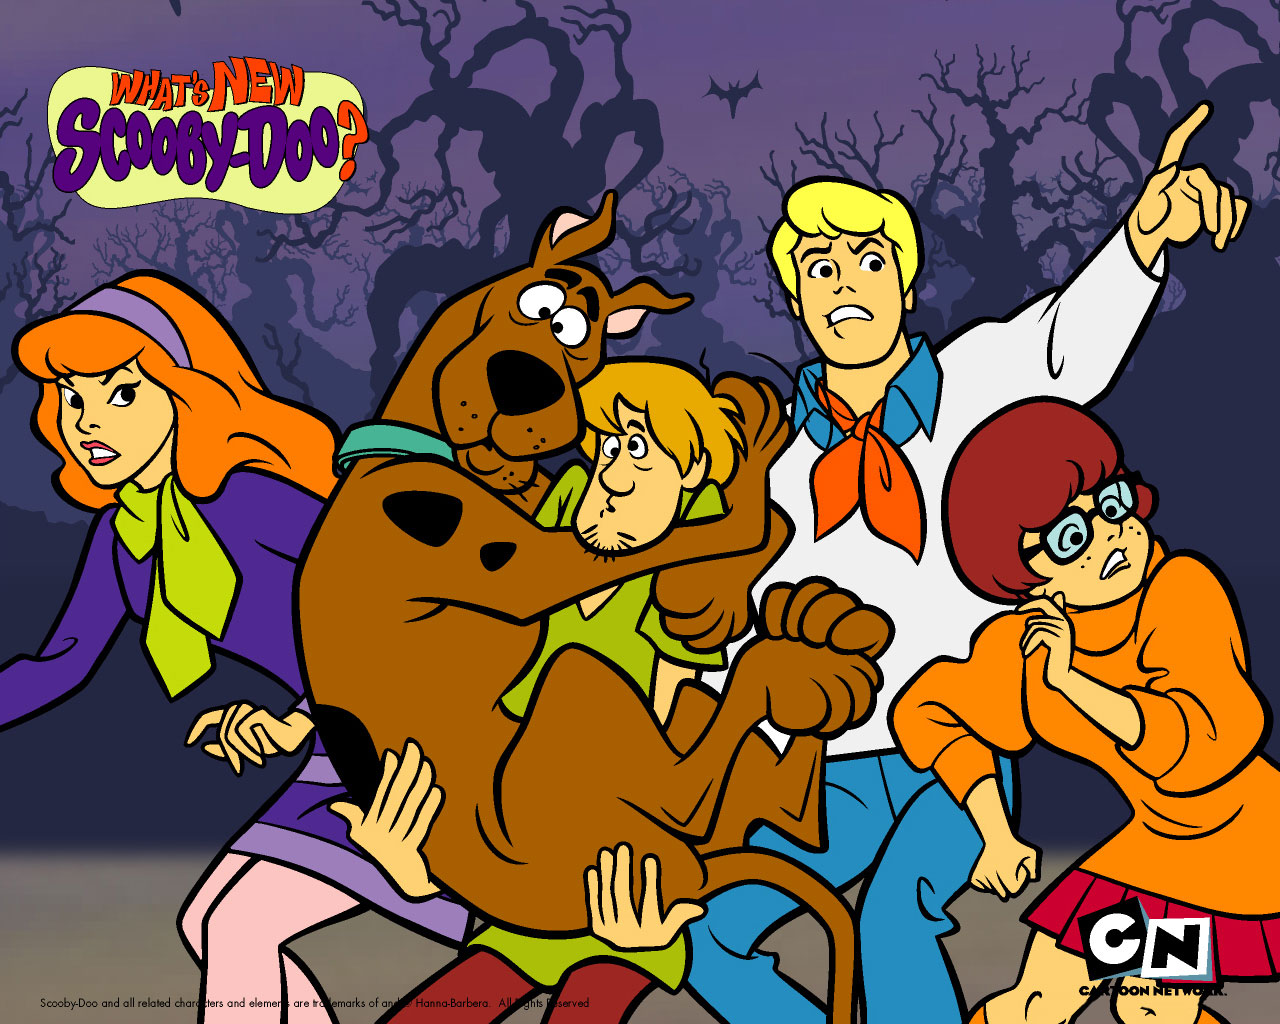 Top 999+ Scooby Doo Wallpaper Full HD, 4K✓Free to Use